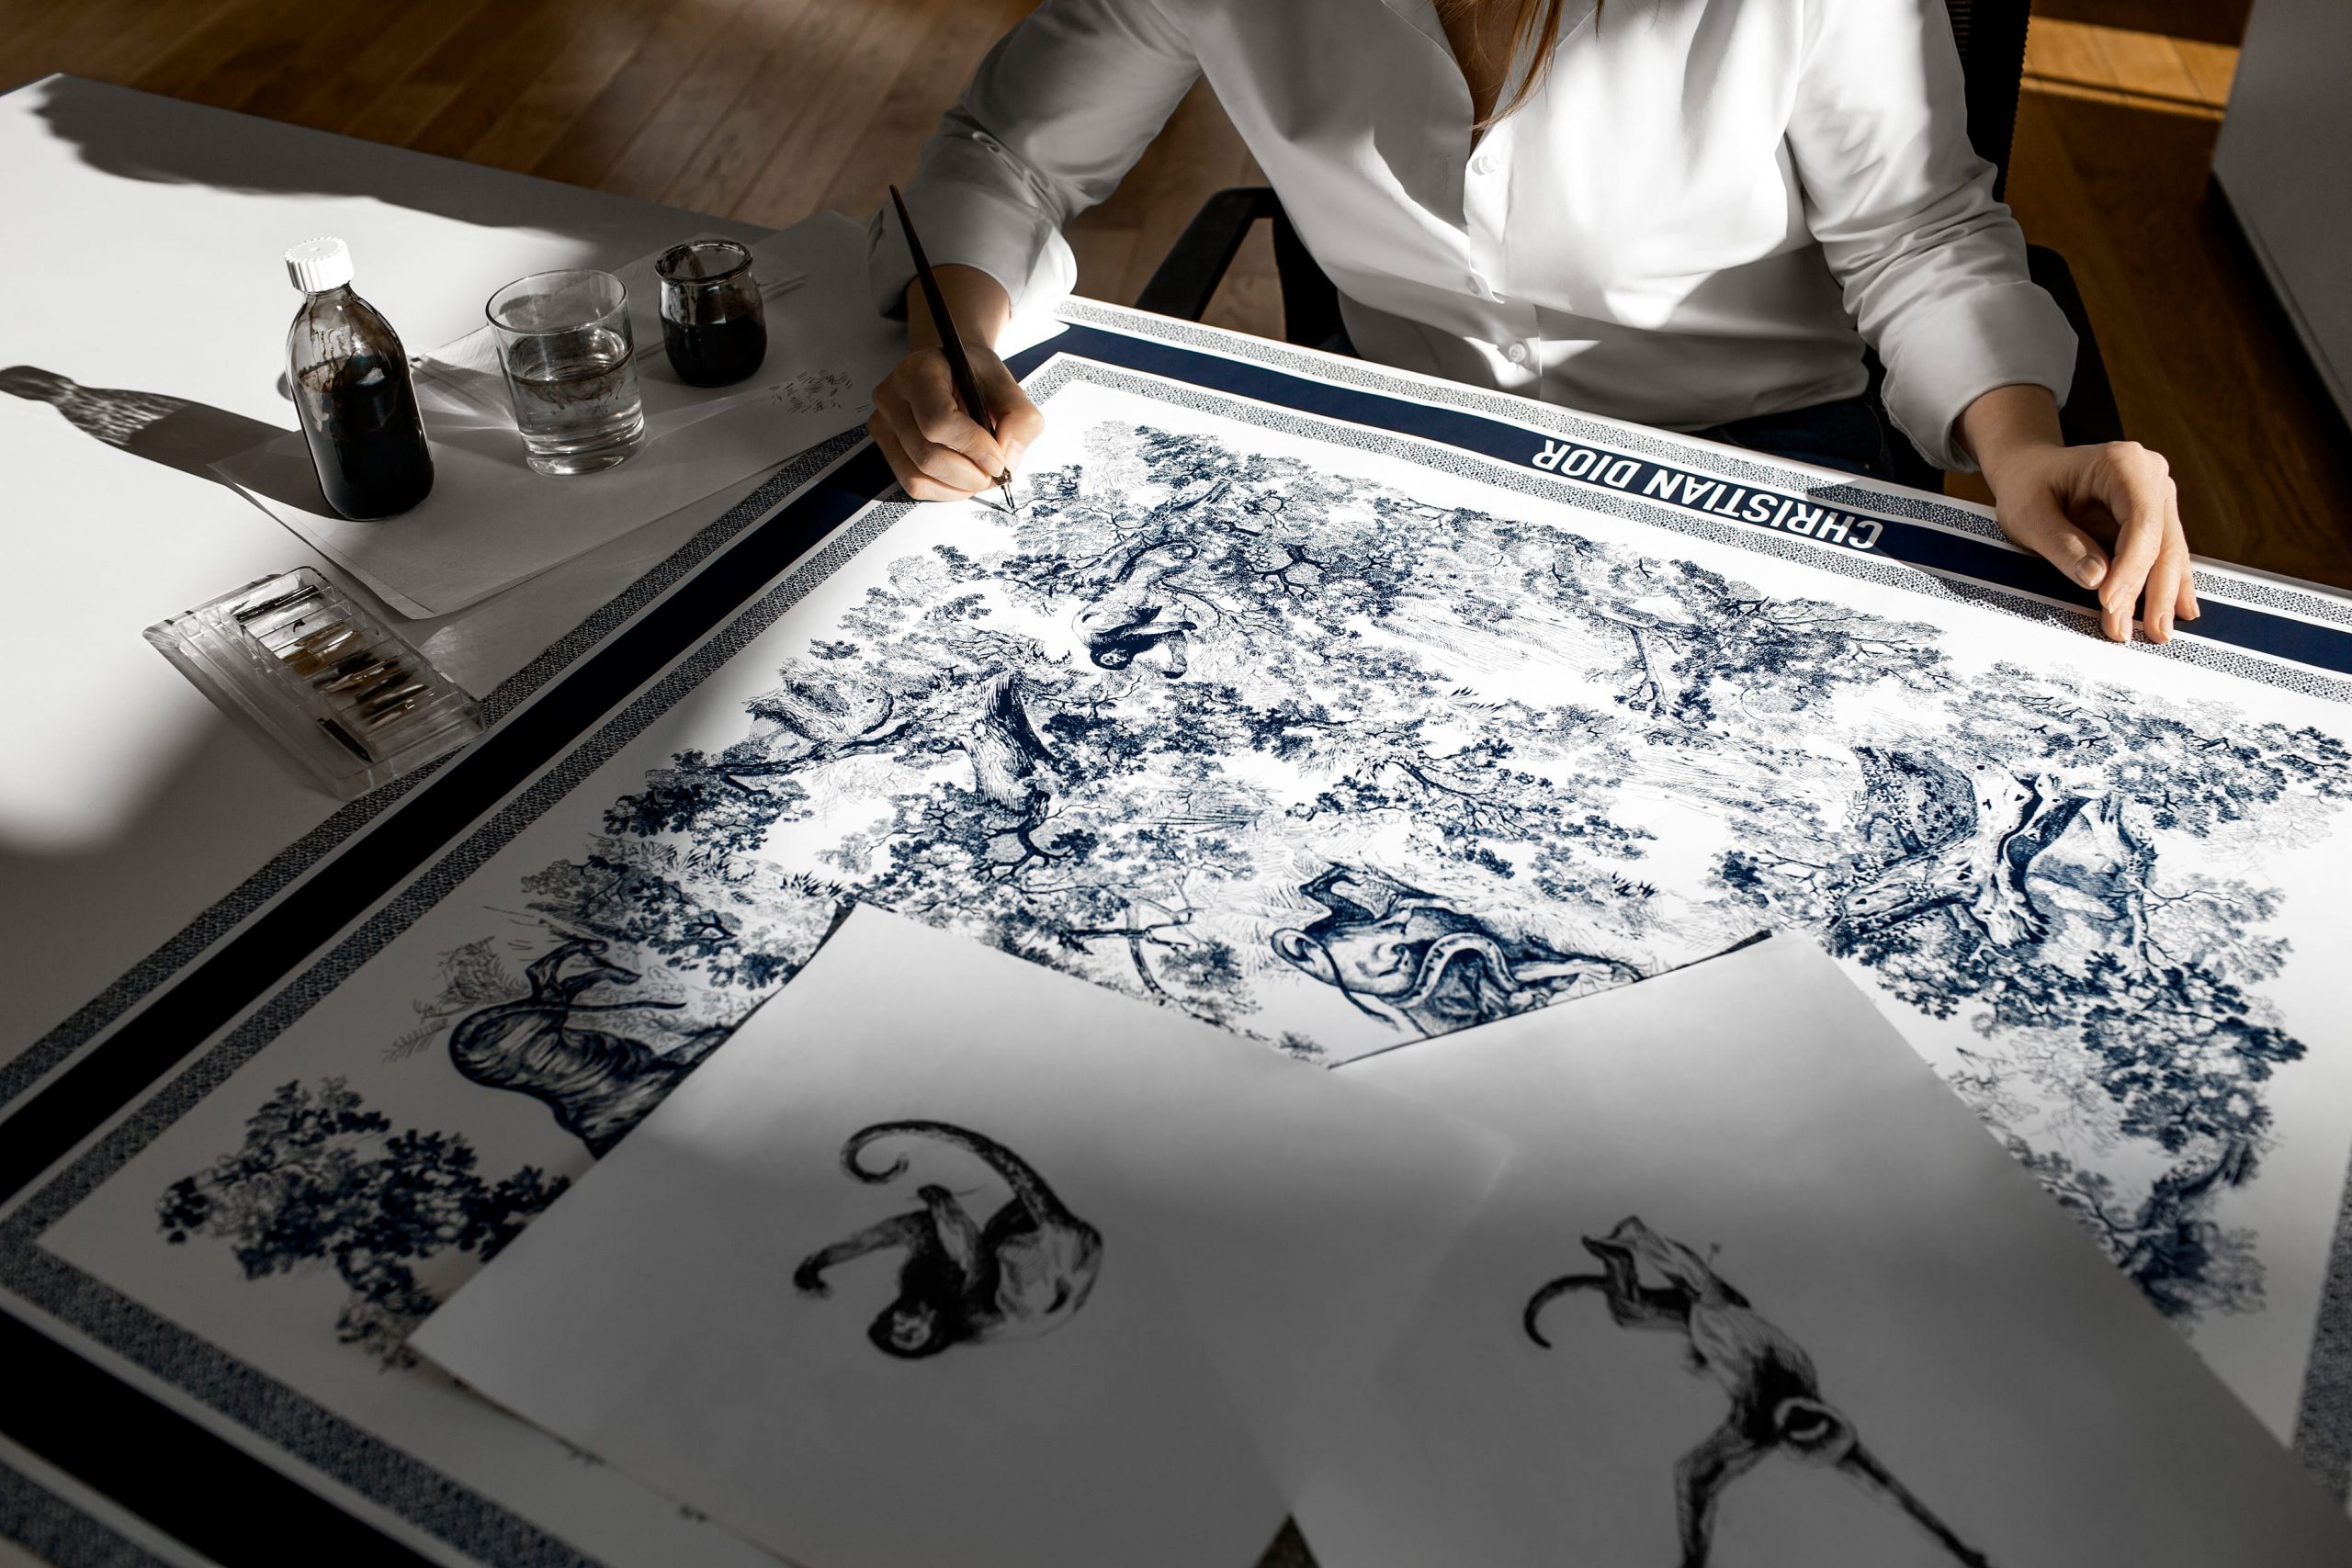 How Dior's Toile de Jouy Silk Scarves Are Made